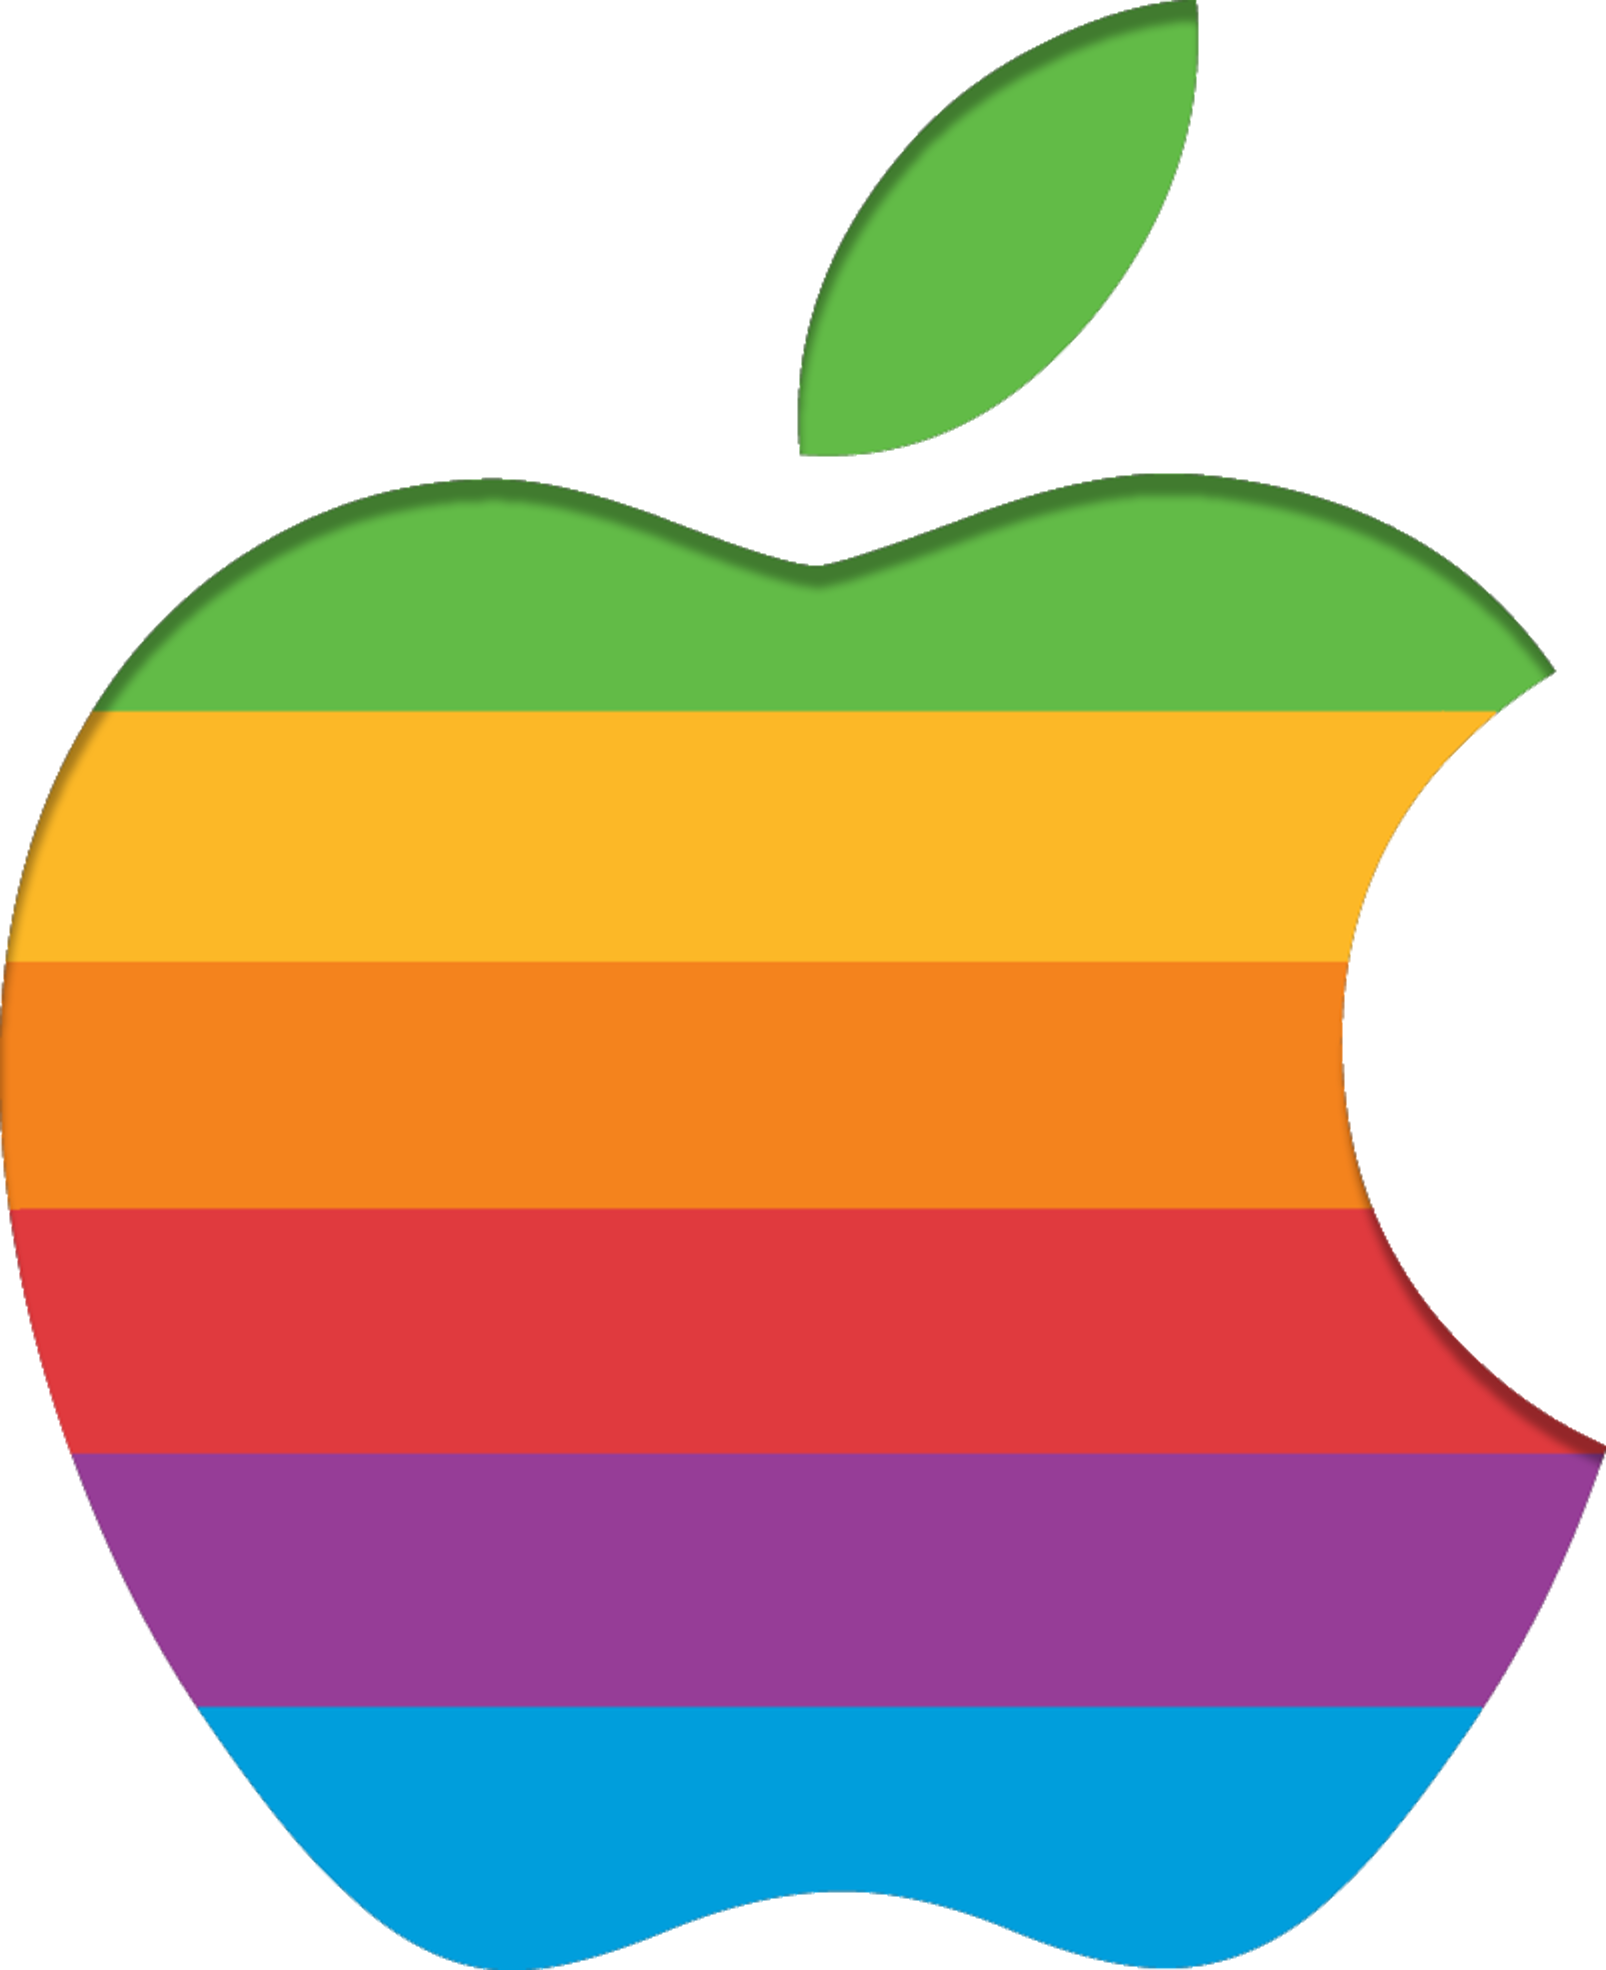 Free Apple Logo Png Transparent Background, Download Free Apple Logo Png Transparent Background png image, Free ClipArts on Clipart Library